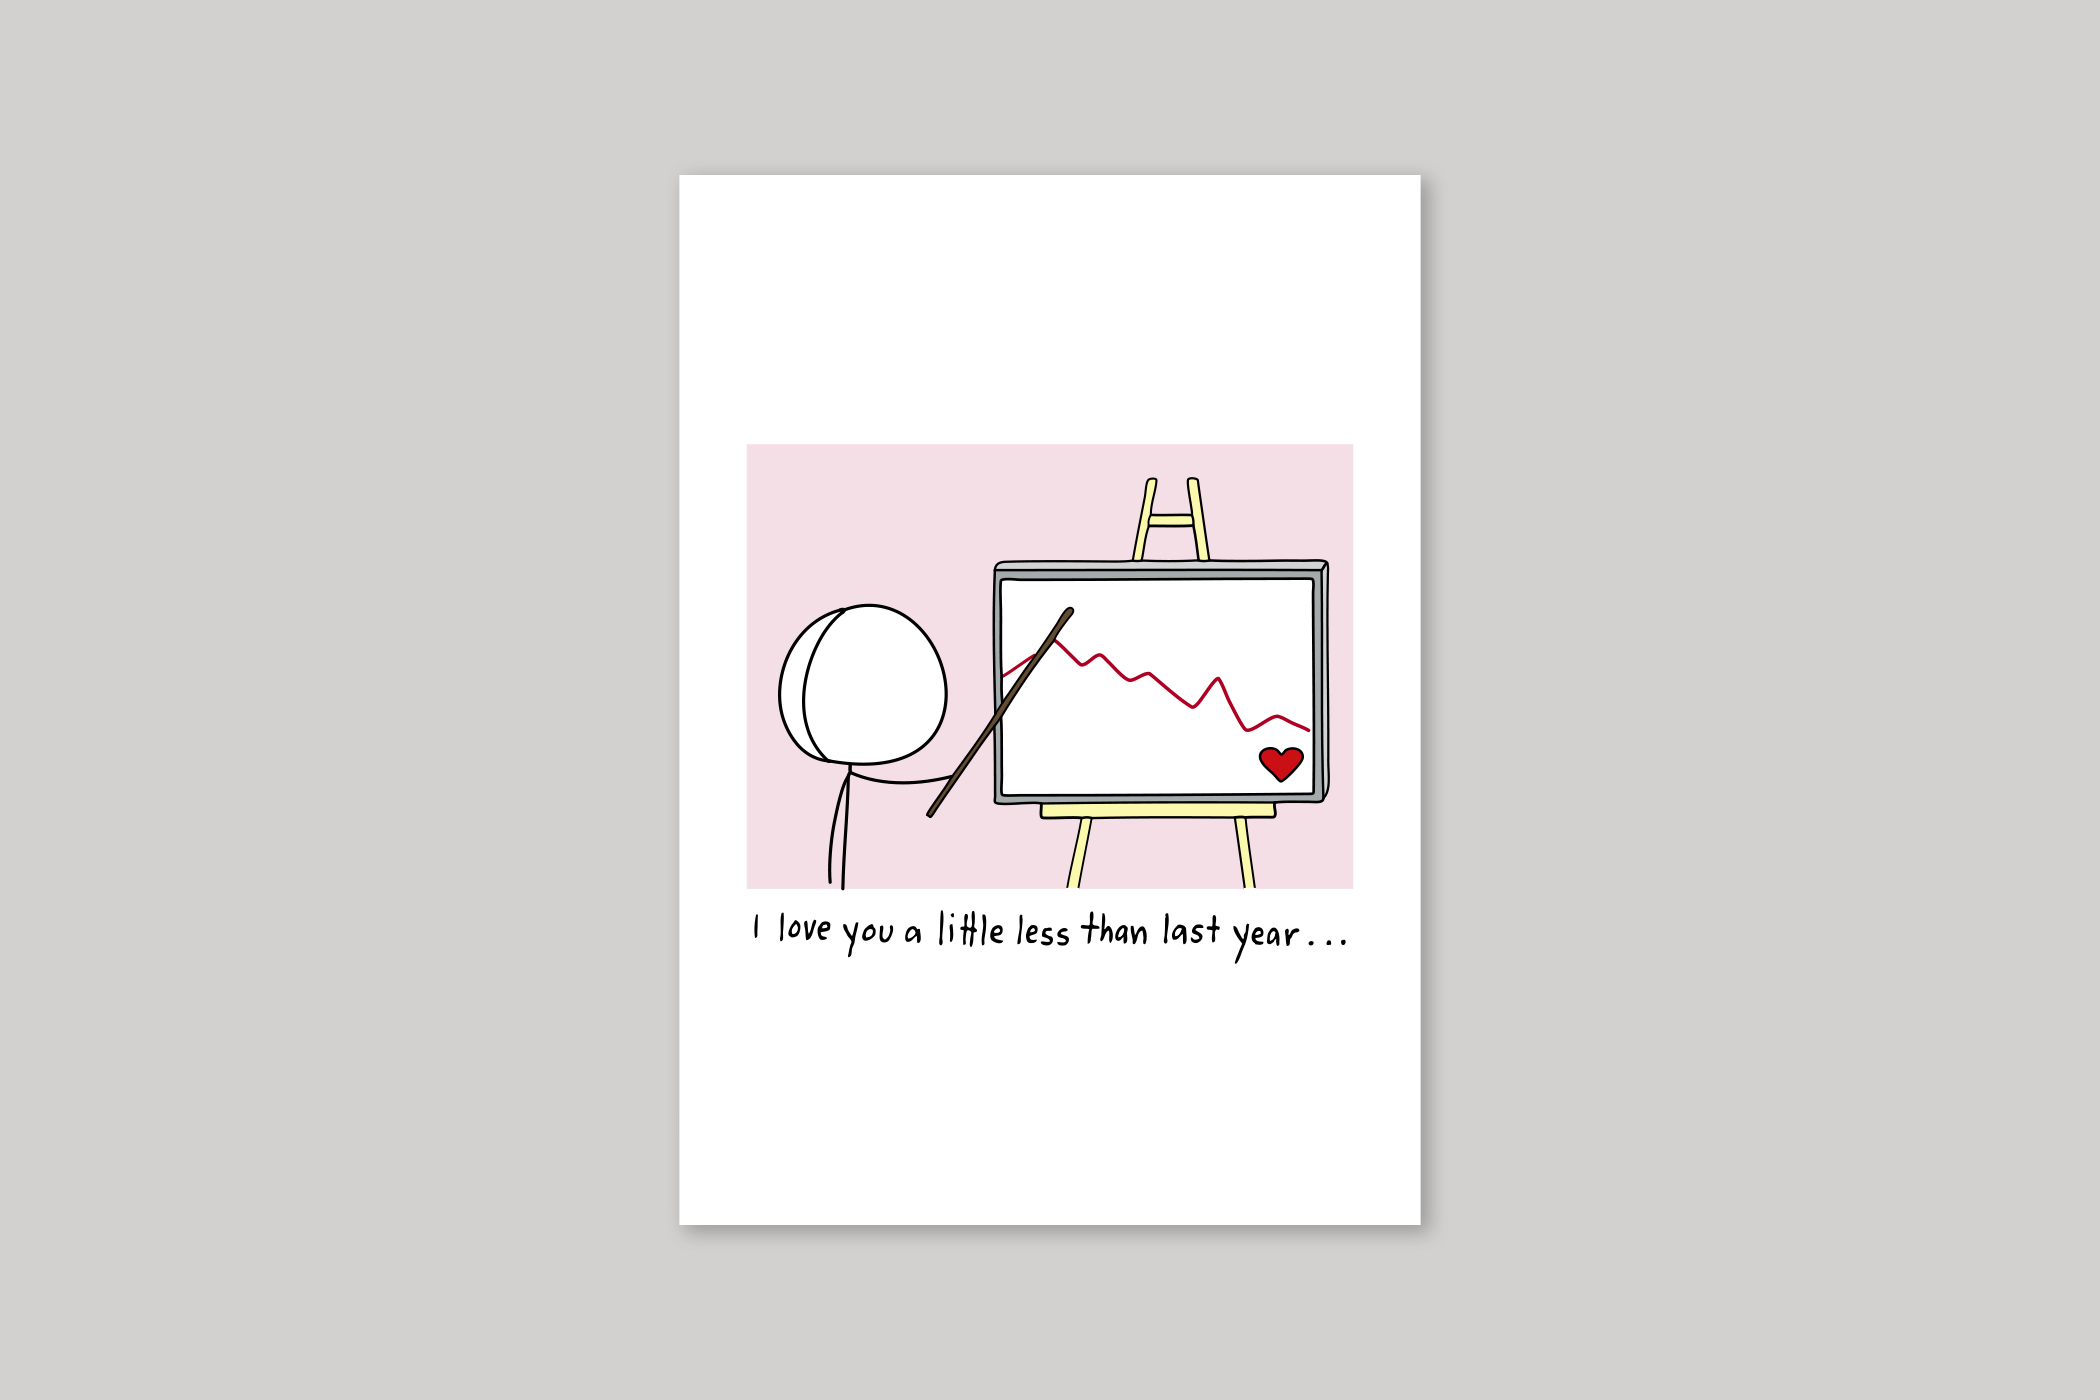 I Love You A Little Less humorous illustration from Mean Cards range of greeting cards by Icon.